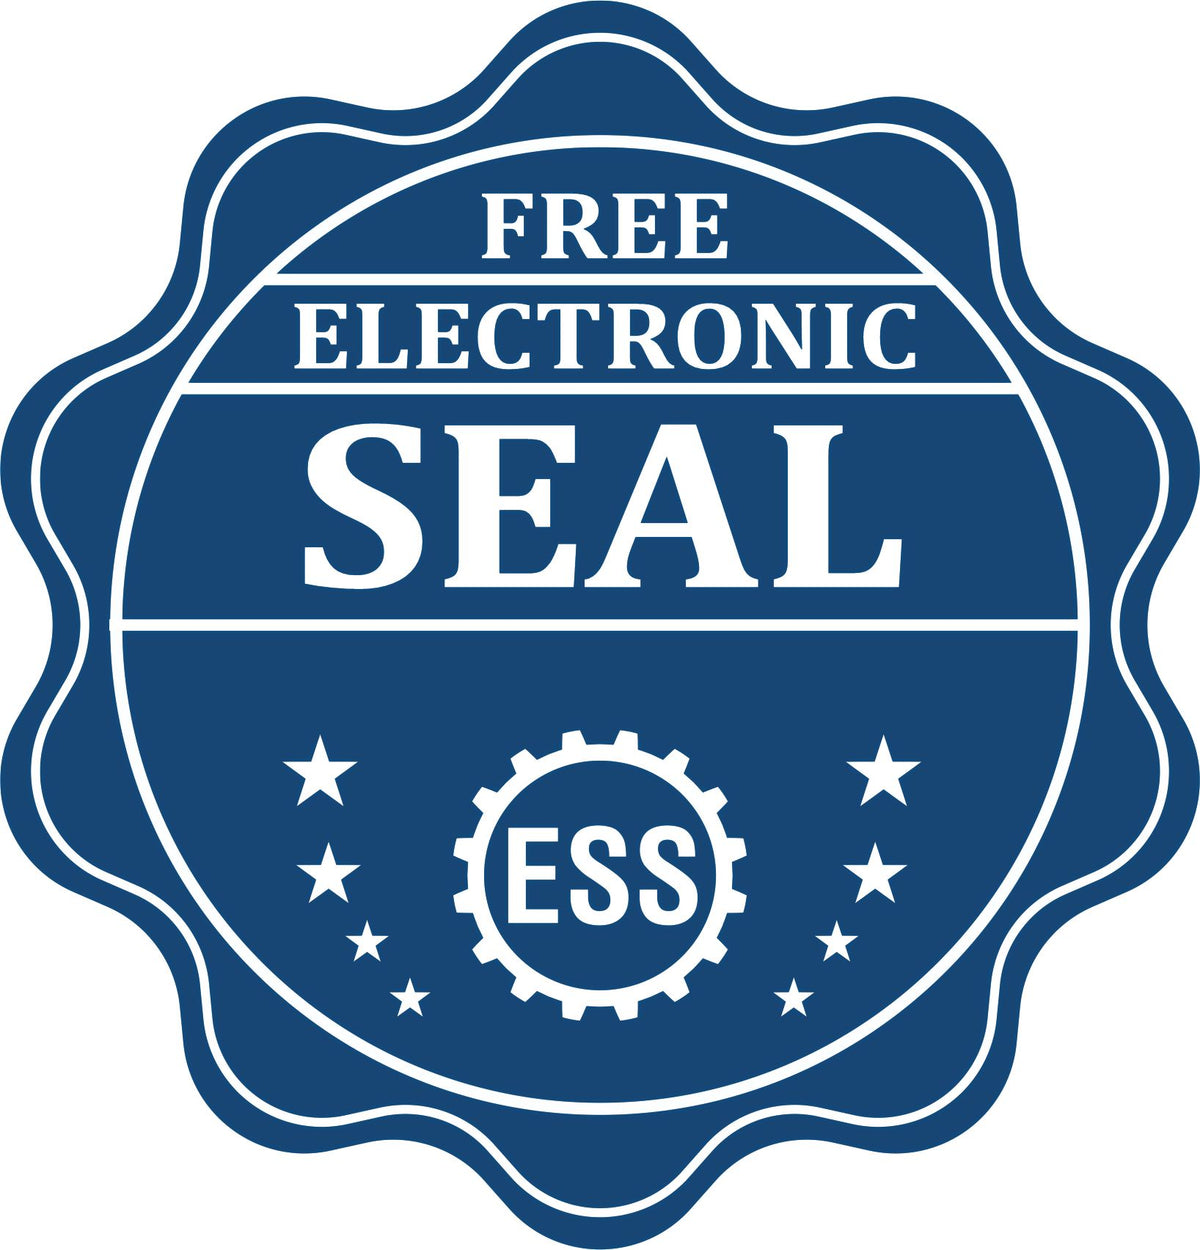 A badge showing a free electronic seal for the Gift Hawaii Engineer Seal with stars and the ESS gear on the emblem.